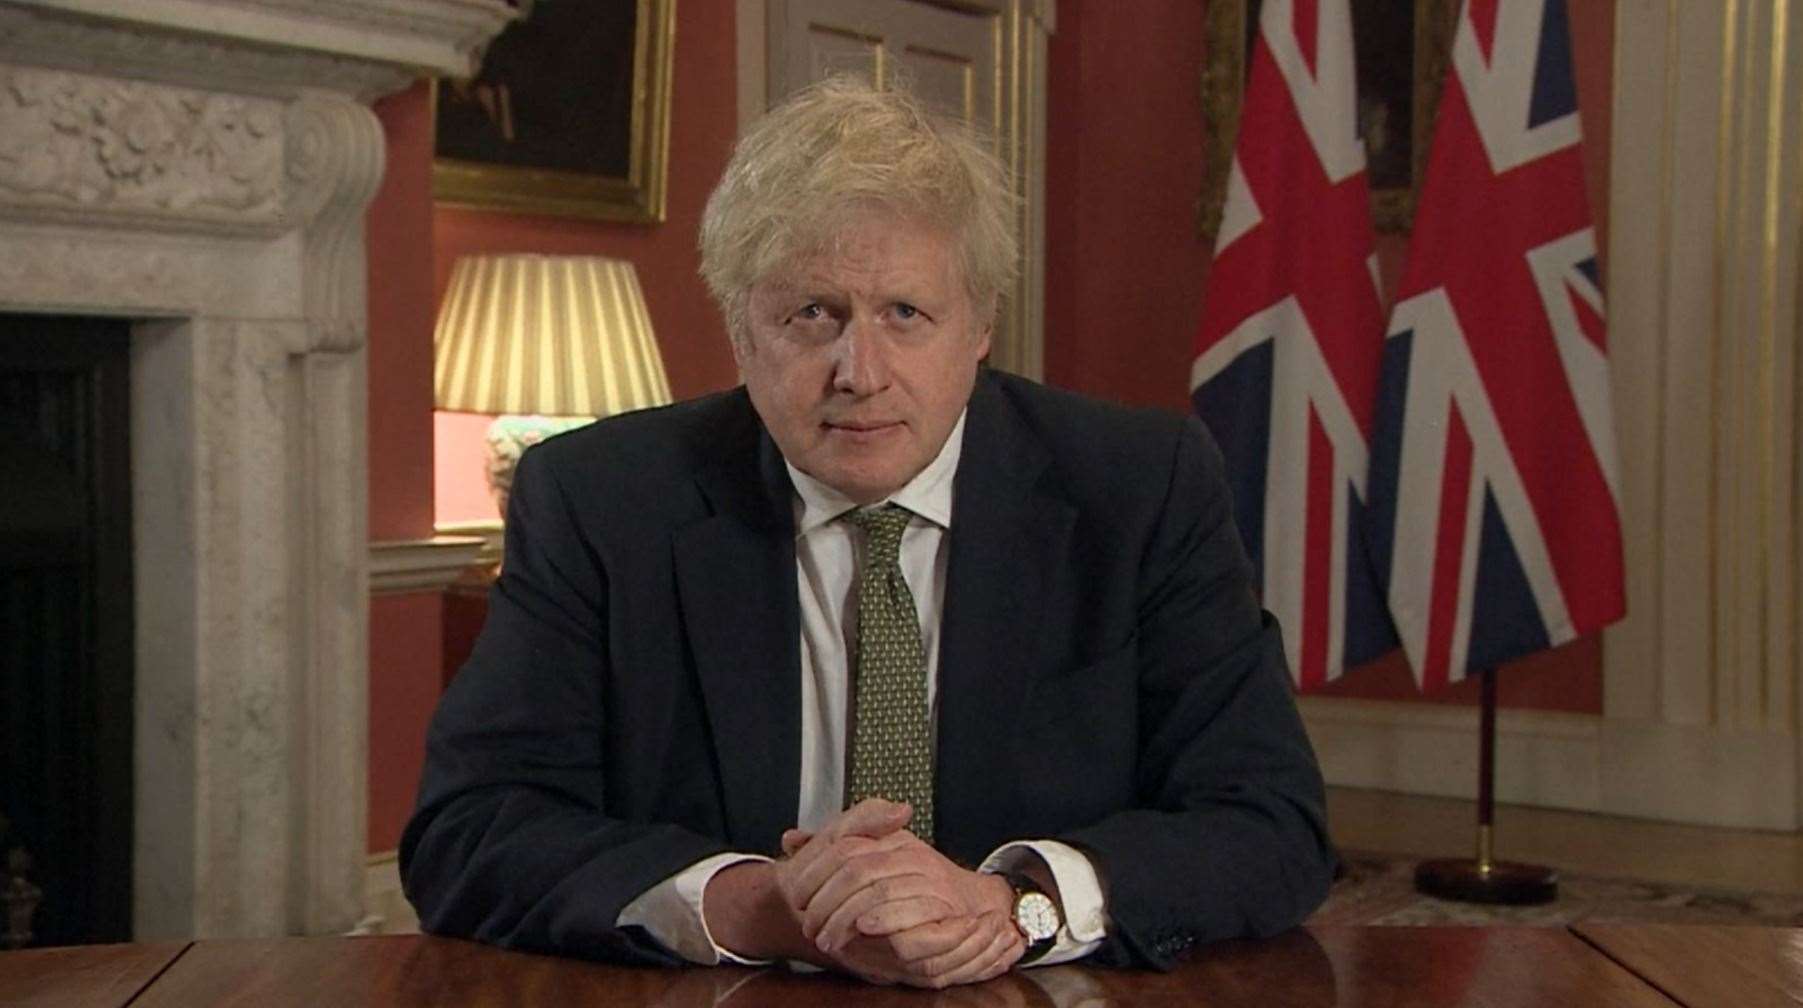 Prime Minister Boris Johnson making will address the nation this evening